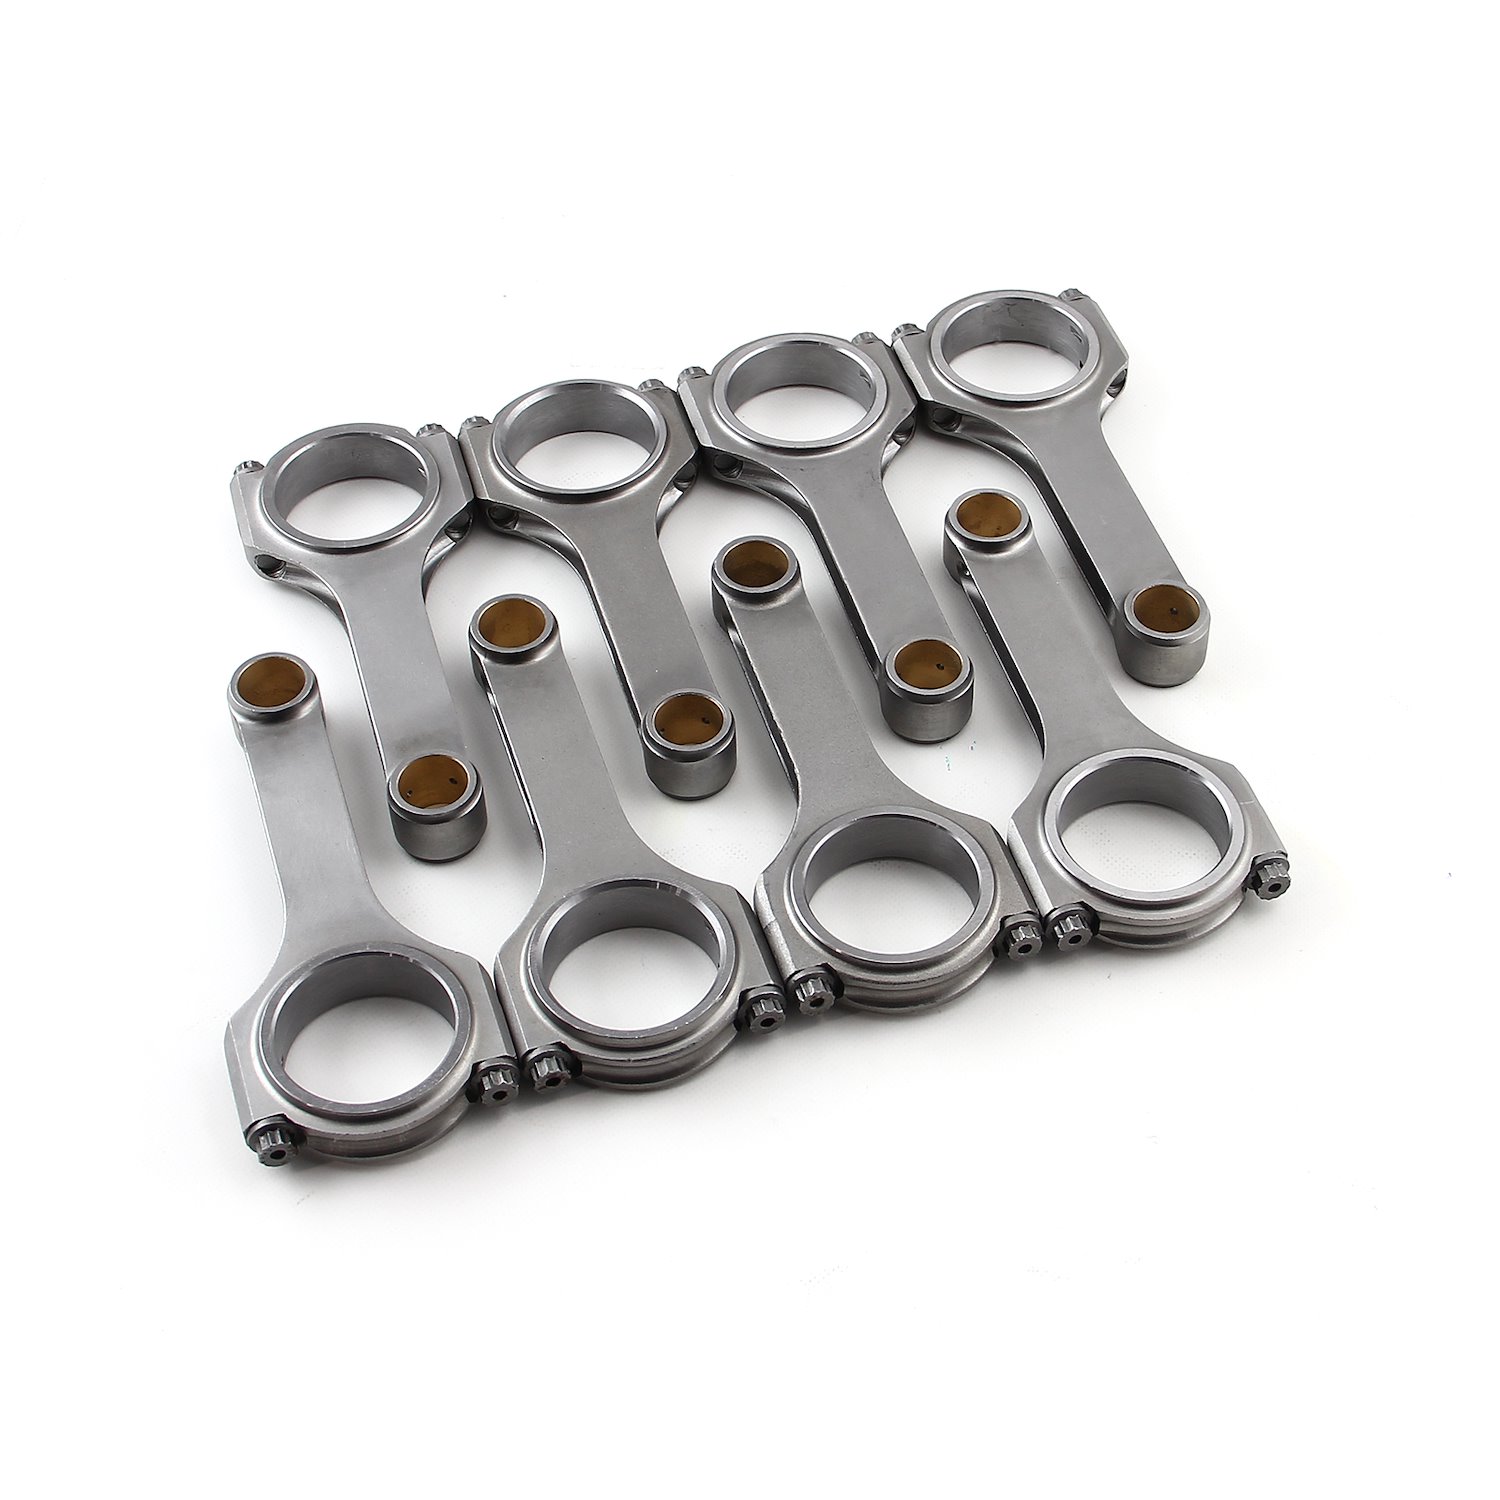 H-Beam Street/Strip Connecting Rods Chevy LS Series